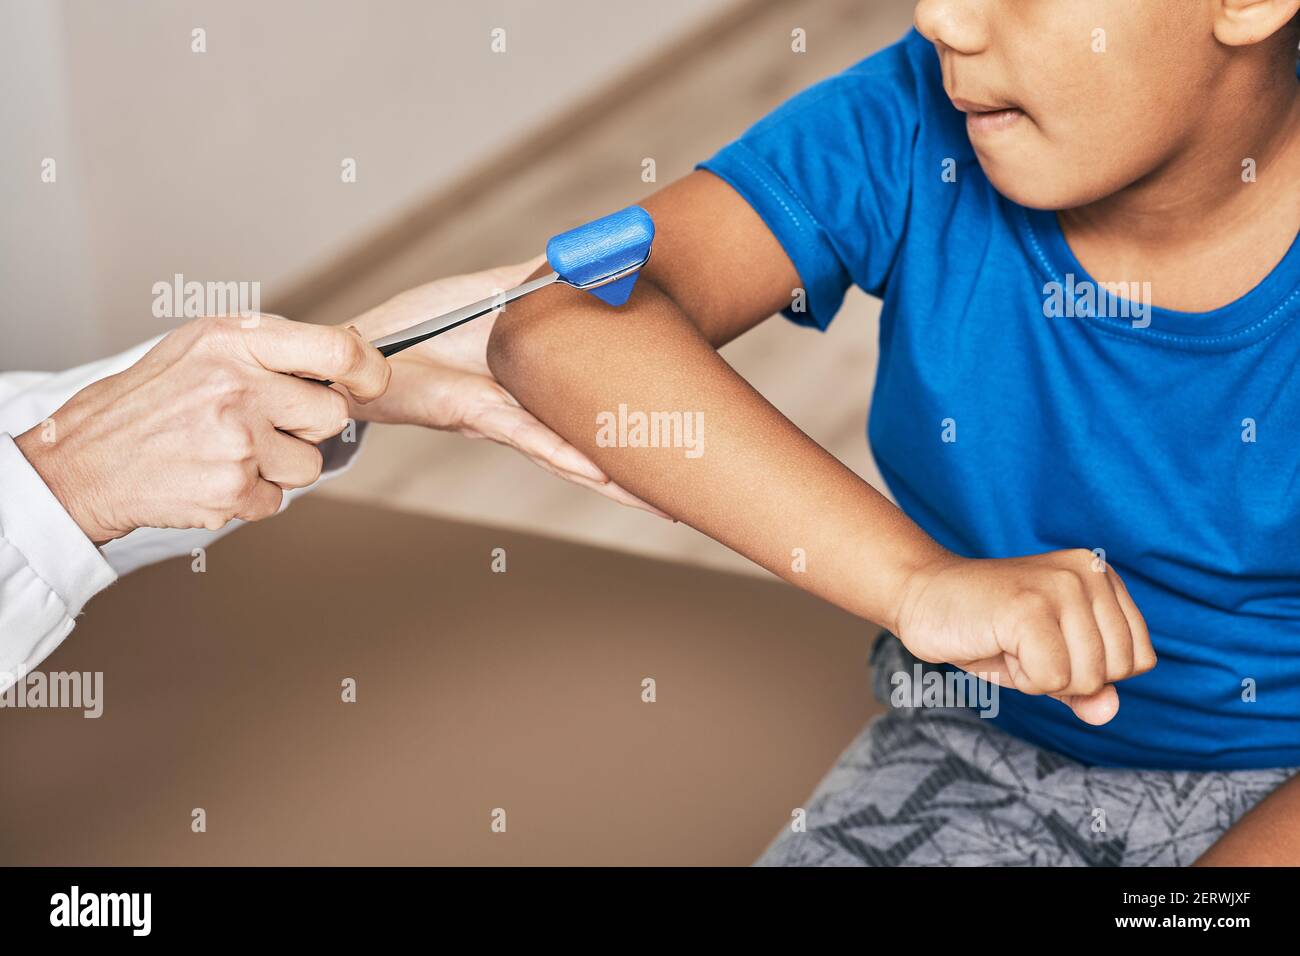 doctor uses a neurological hammer to check reflexes of the biceps muscle of the child's hand. Neurologic examination Stock Photo